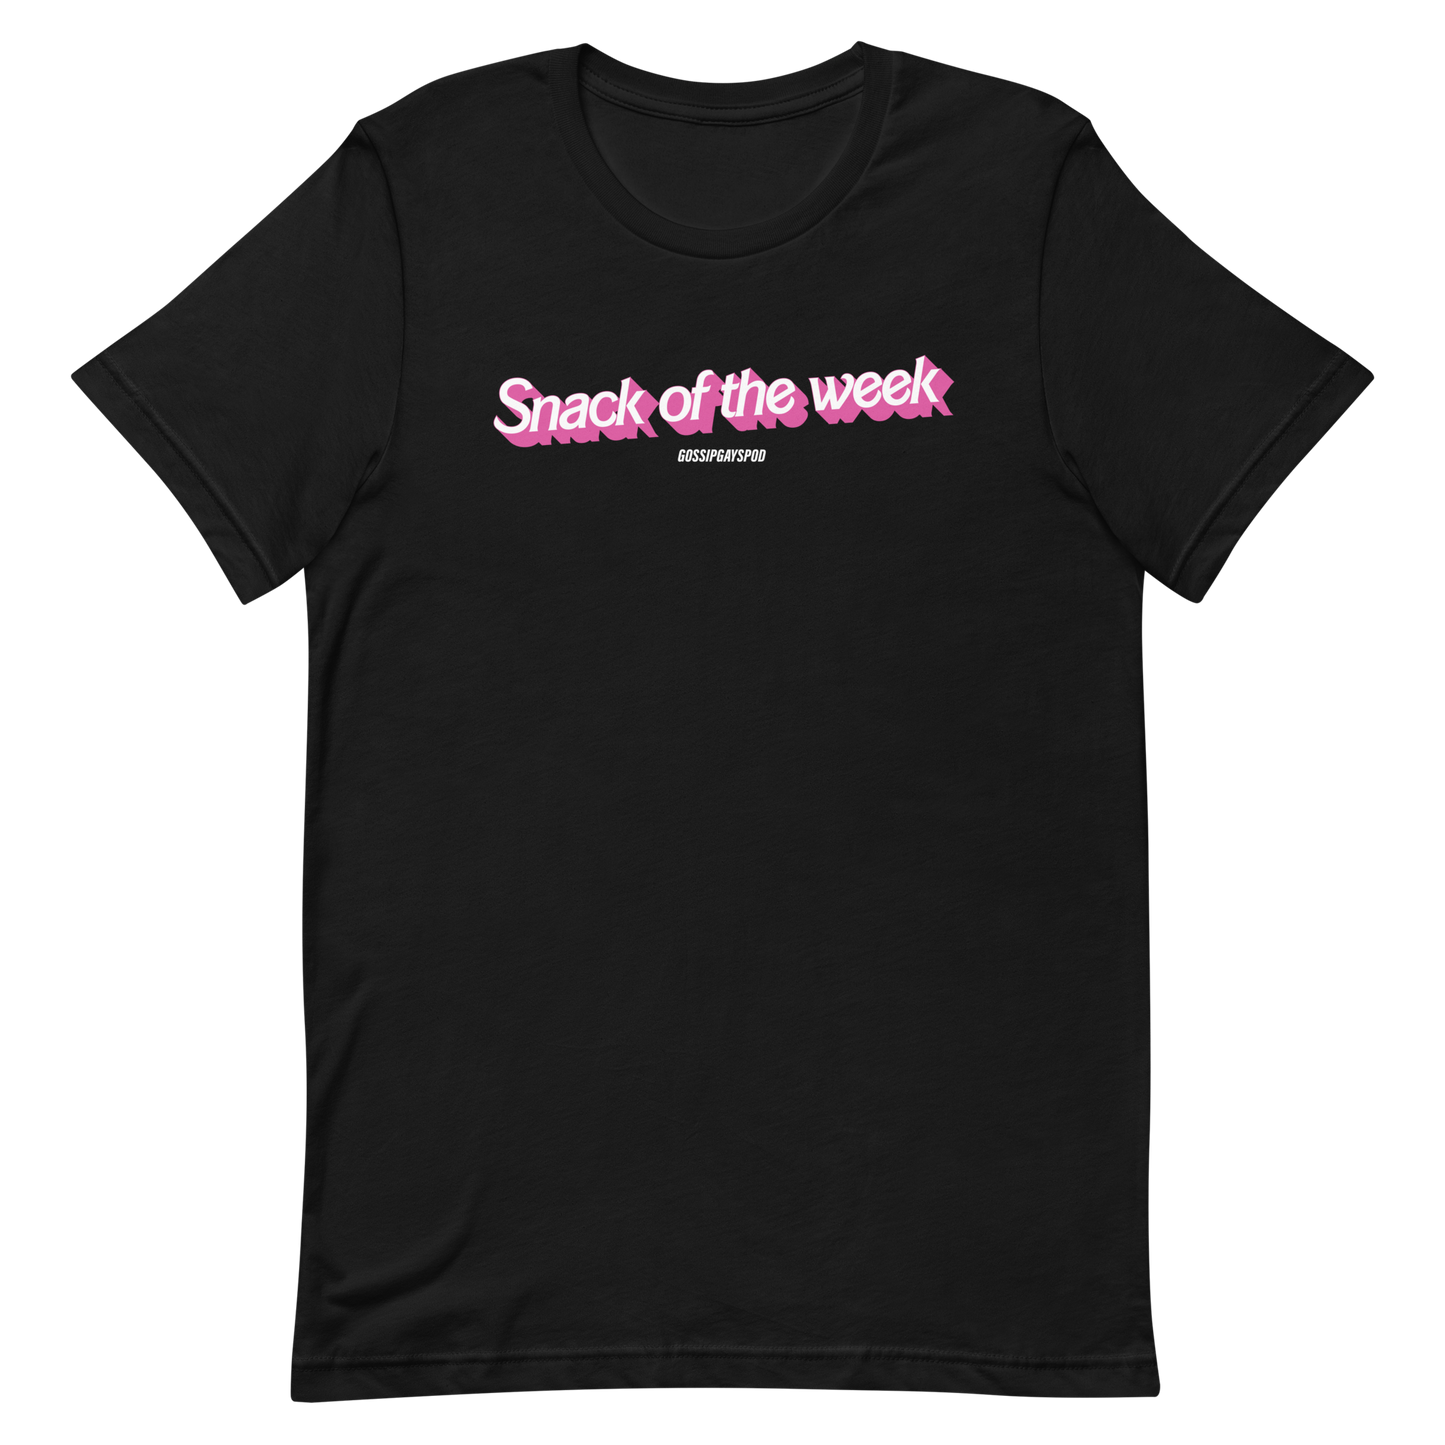 The Gossip Gays Snack of the Week T-shirt Pink